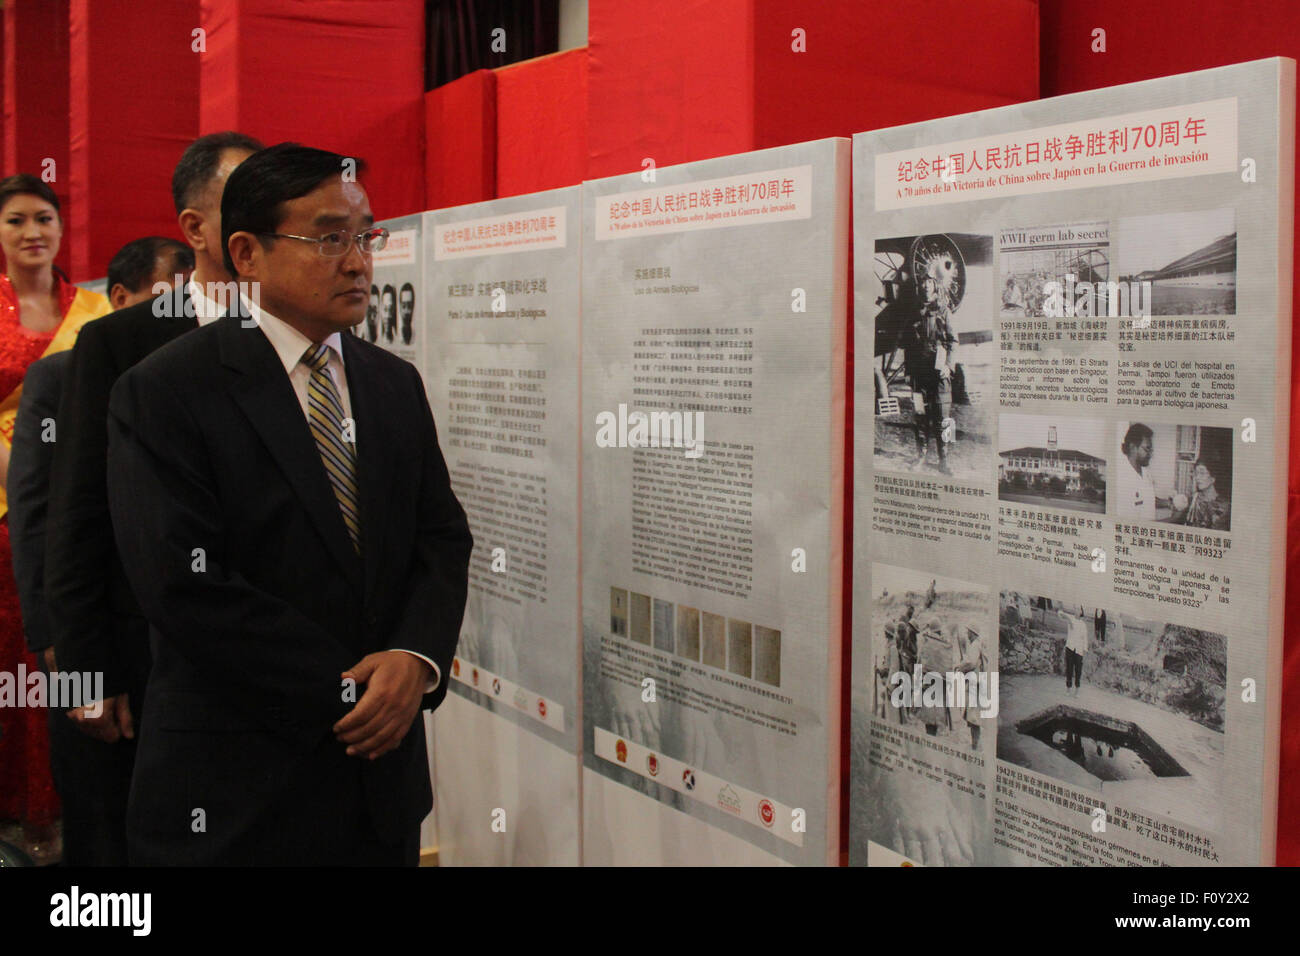 Lima, Peru. 22nd Aug, 2015. Chinese Ambassador to Peru Jia Guide visits the exposition 'La Historia No Se Puede Olvidar' (History Can Not Be Forgotten) at the facilities of the Chinese Charity Central Society in Lima city, Peru, on Aug. 22, 2015. Chinese community in Peru is celebrating the 70th anniversary of the victory of the World Anti-Fascist War with an exposition called 'La Historia No Se Puede Olvidar' (History Can Not Be Forgotten). © Luis Camacho/Xinhua/Alamy Live News Stock Photo